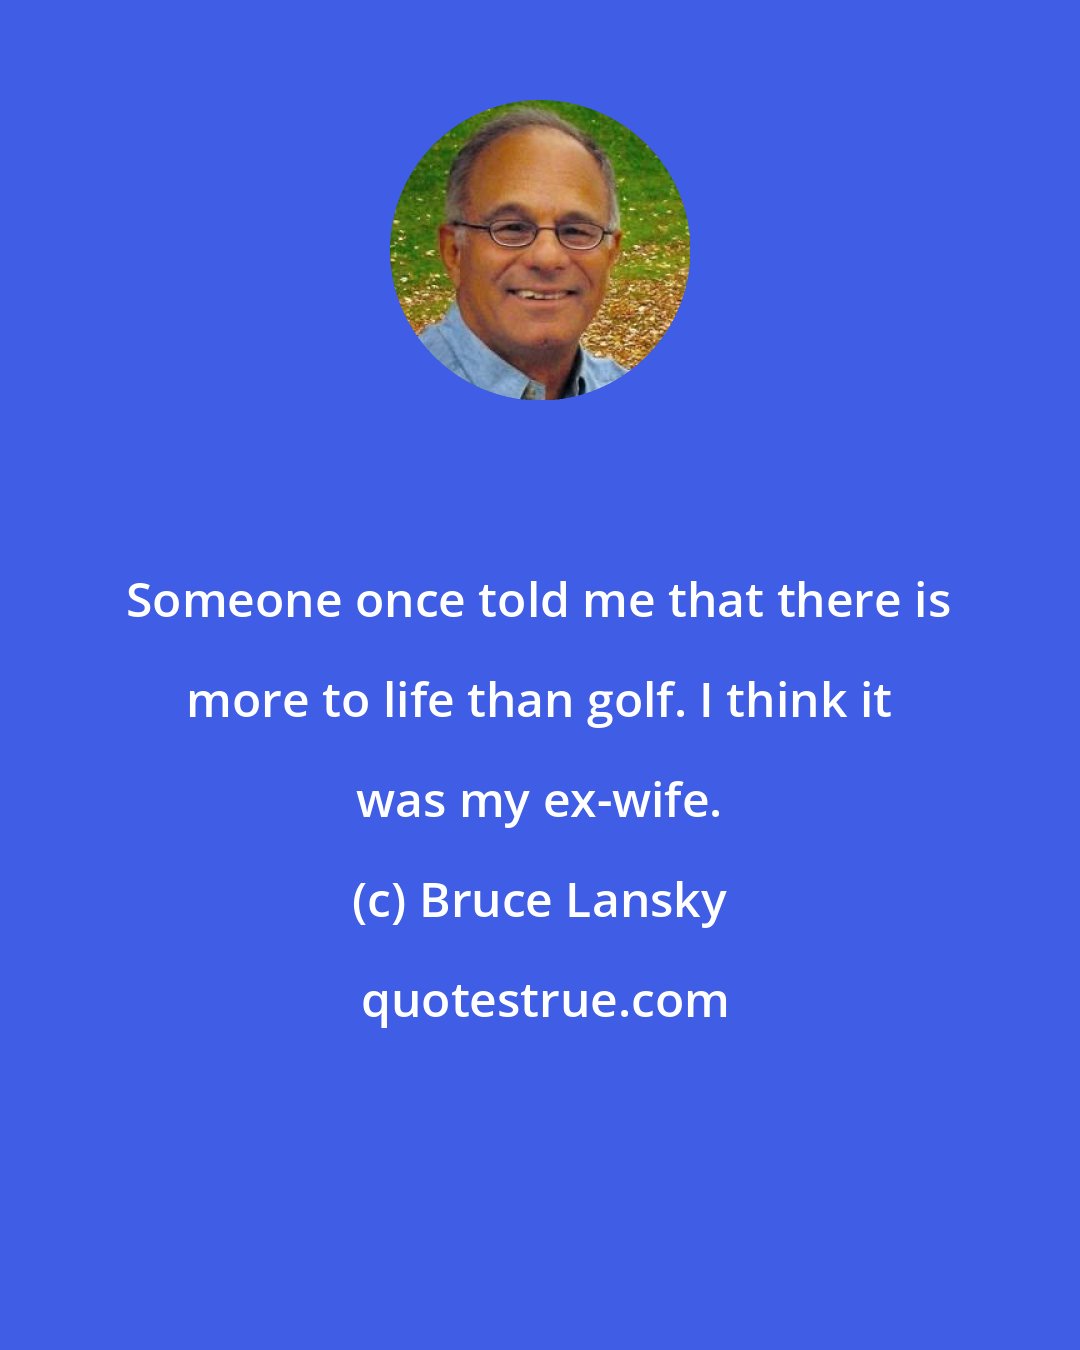 Bruce Lansky: Someone once told me that there is more to life than golf. I think it was my ex-wife.